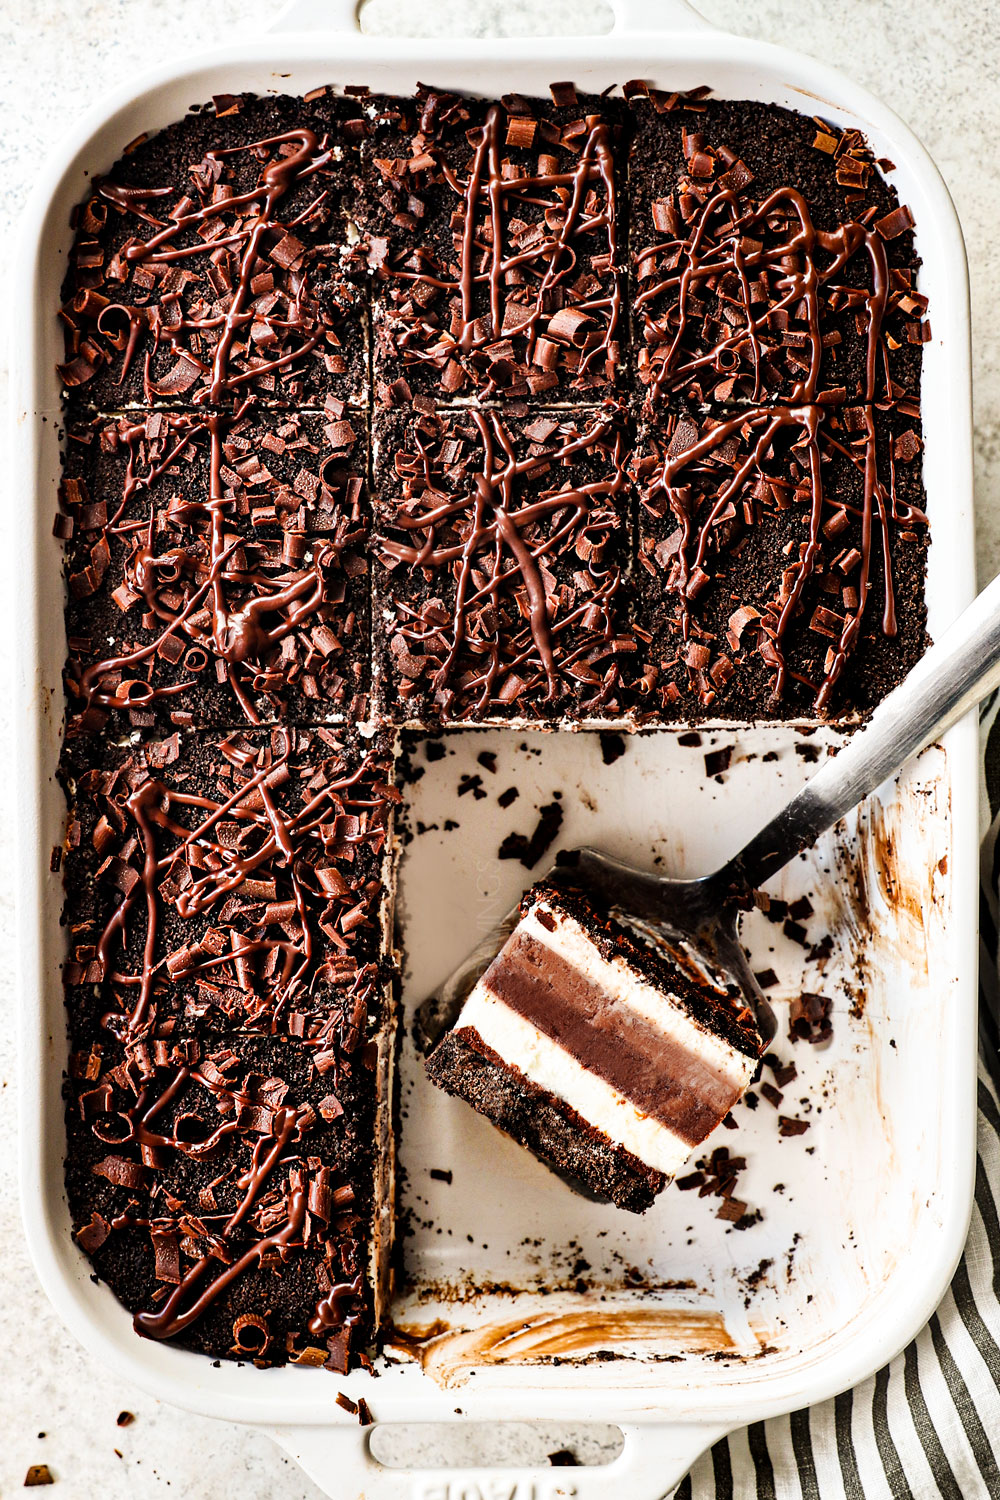 top view of chocolate lasagna showing how to add toppings of Oreo crumbs, chocolate drizzle and chocolate shavings